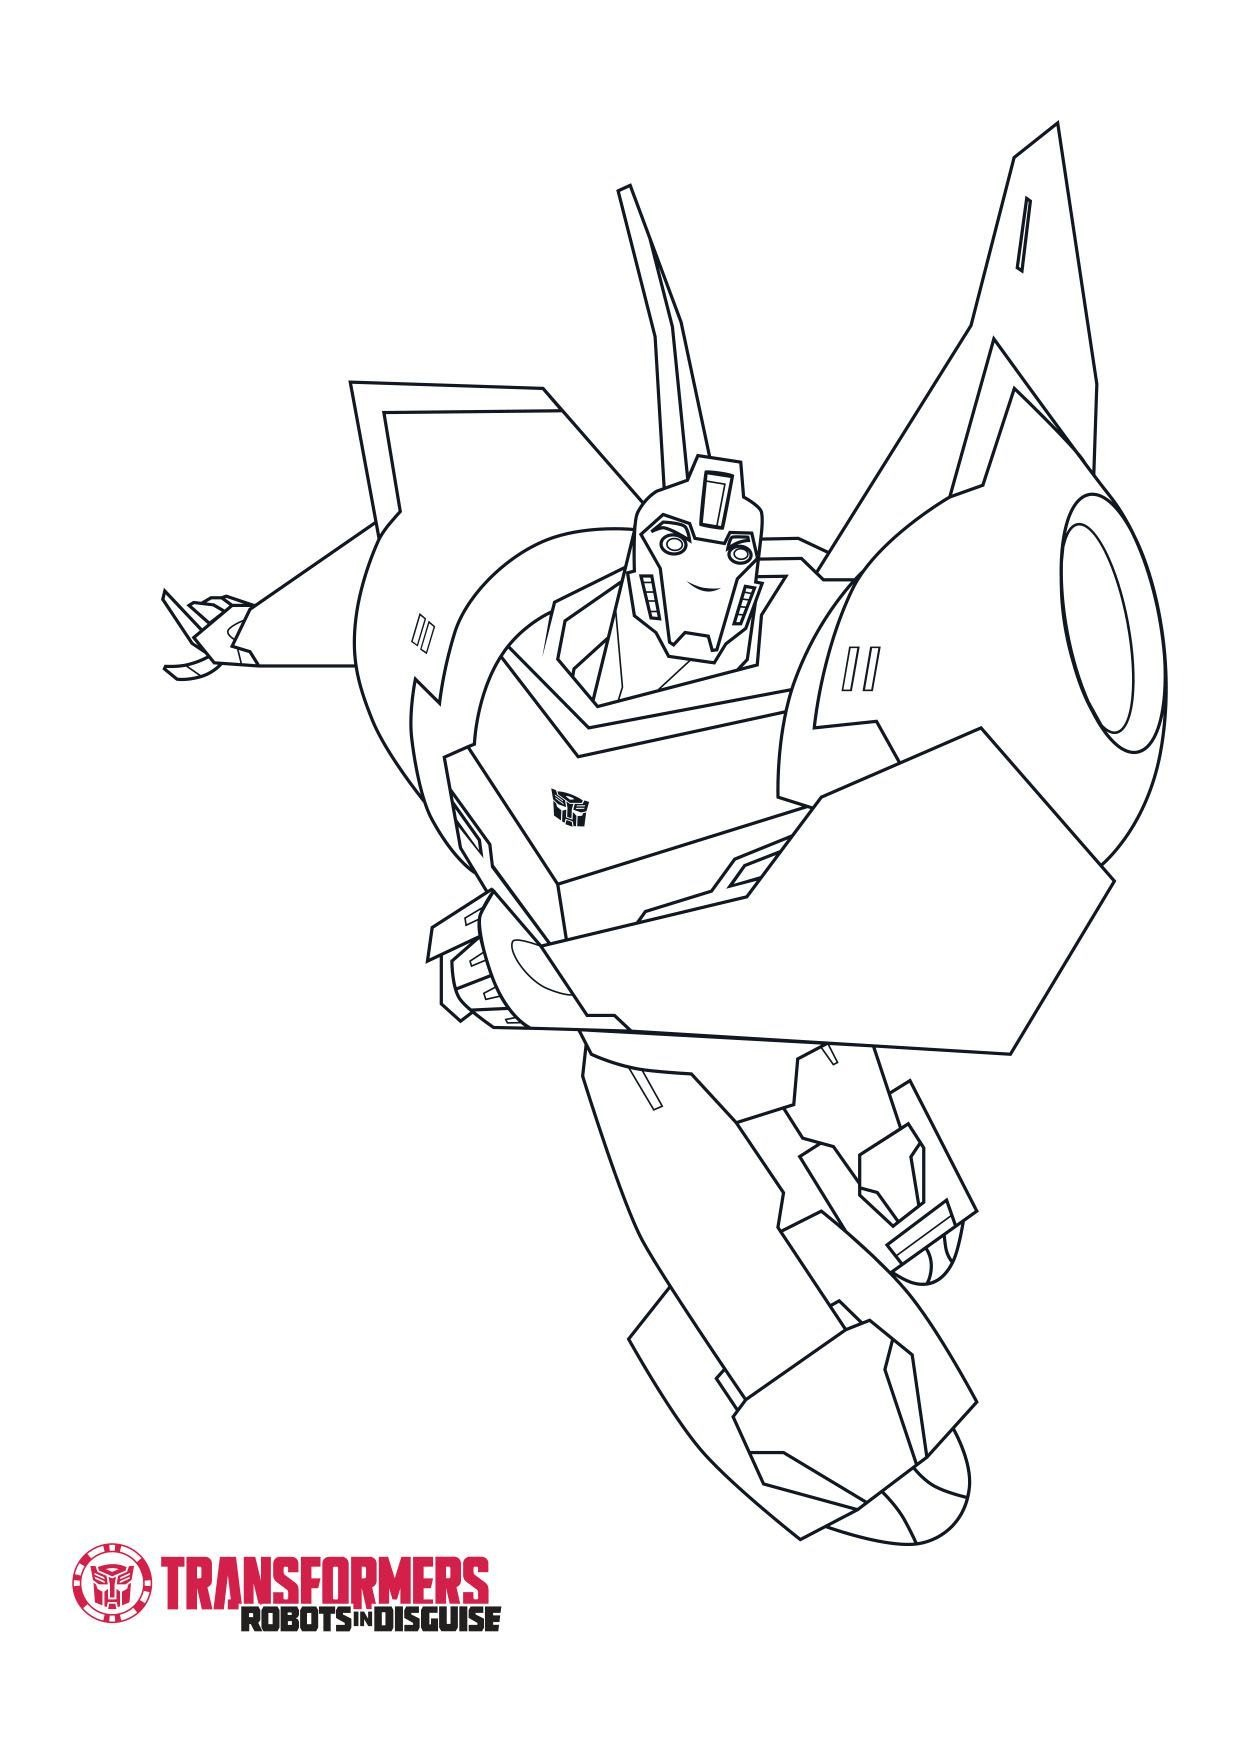 Bumblebee 1 - Coloriages Dessins Animes - Transformers Robots In Disguise avec Coloriage Transformers Bumblebee